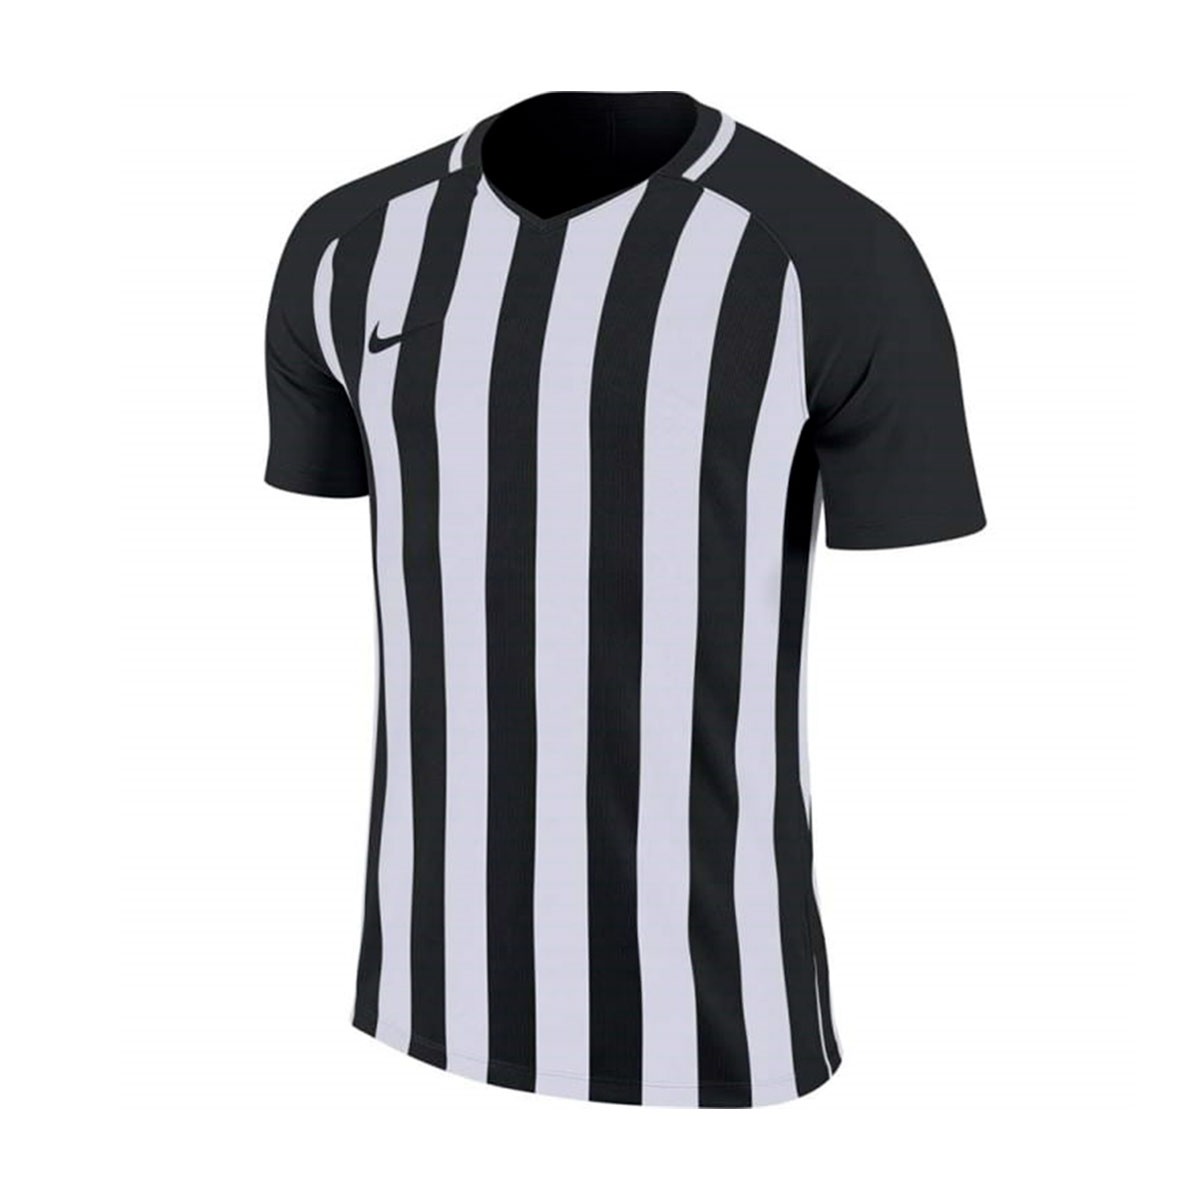 Jersey Nike Kids Striped Division III m 